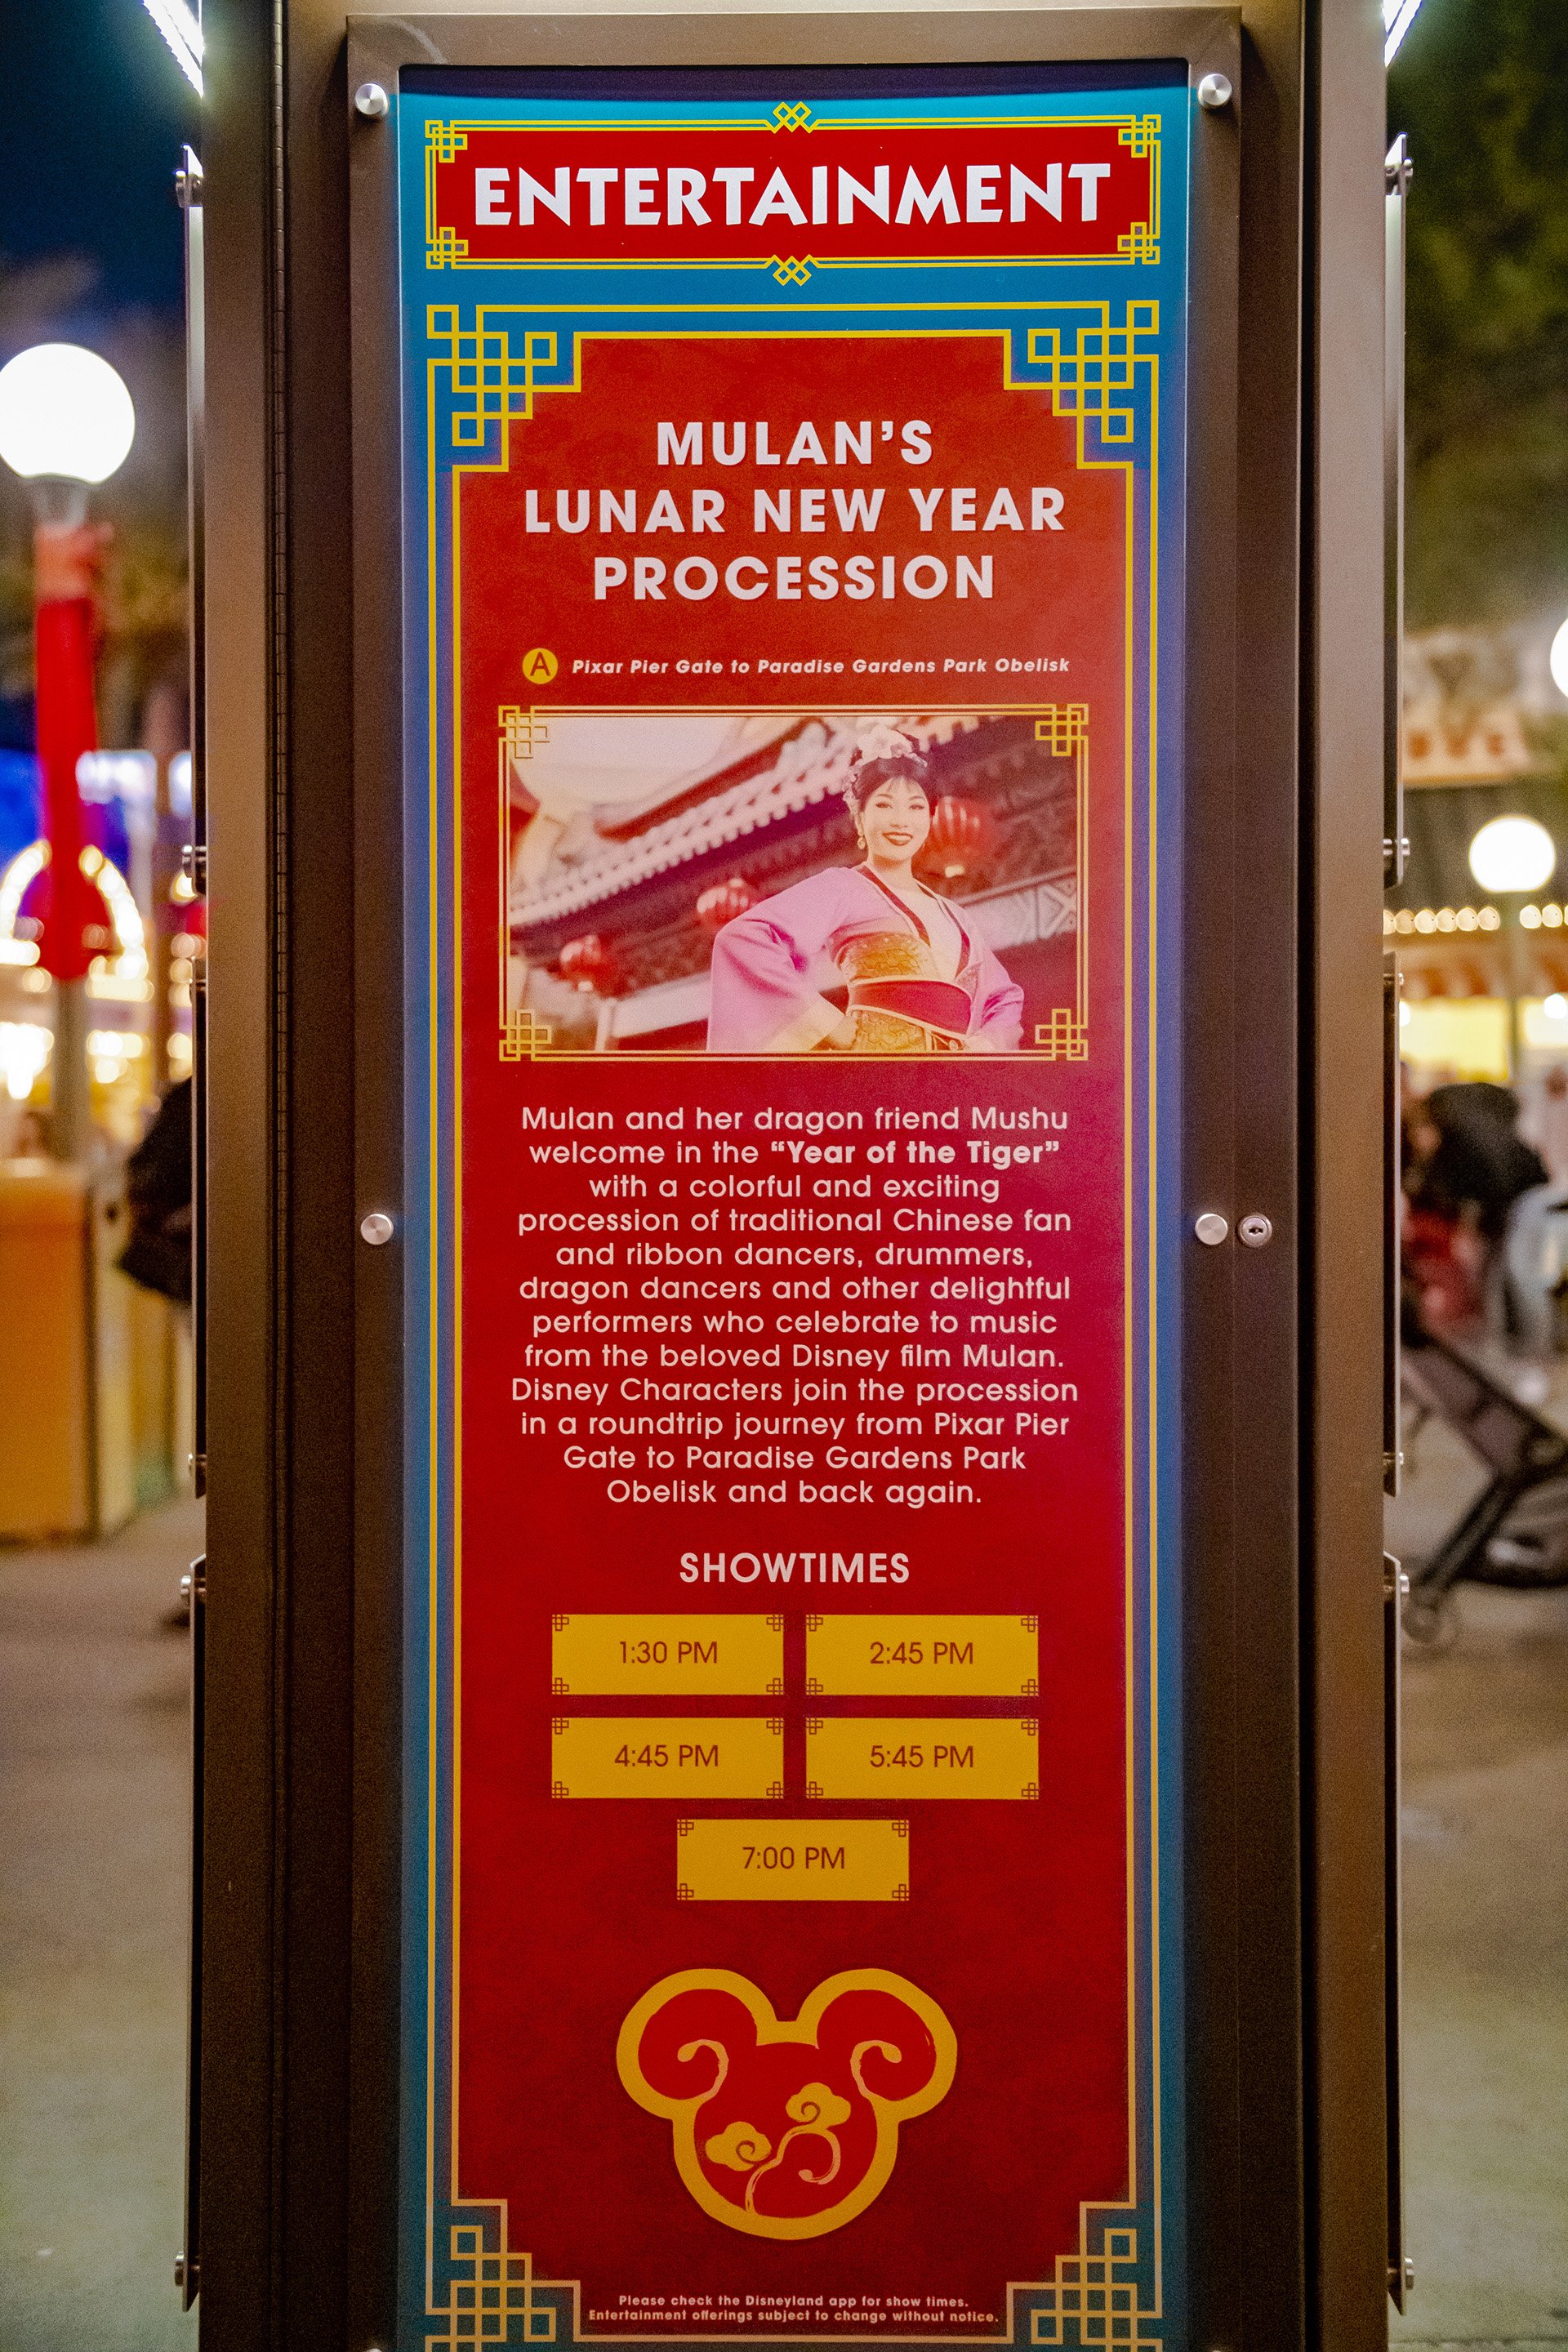  Mulan’s Lunar New Year Procession takes place five times a day, from early afternoon to early evening. 